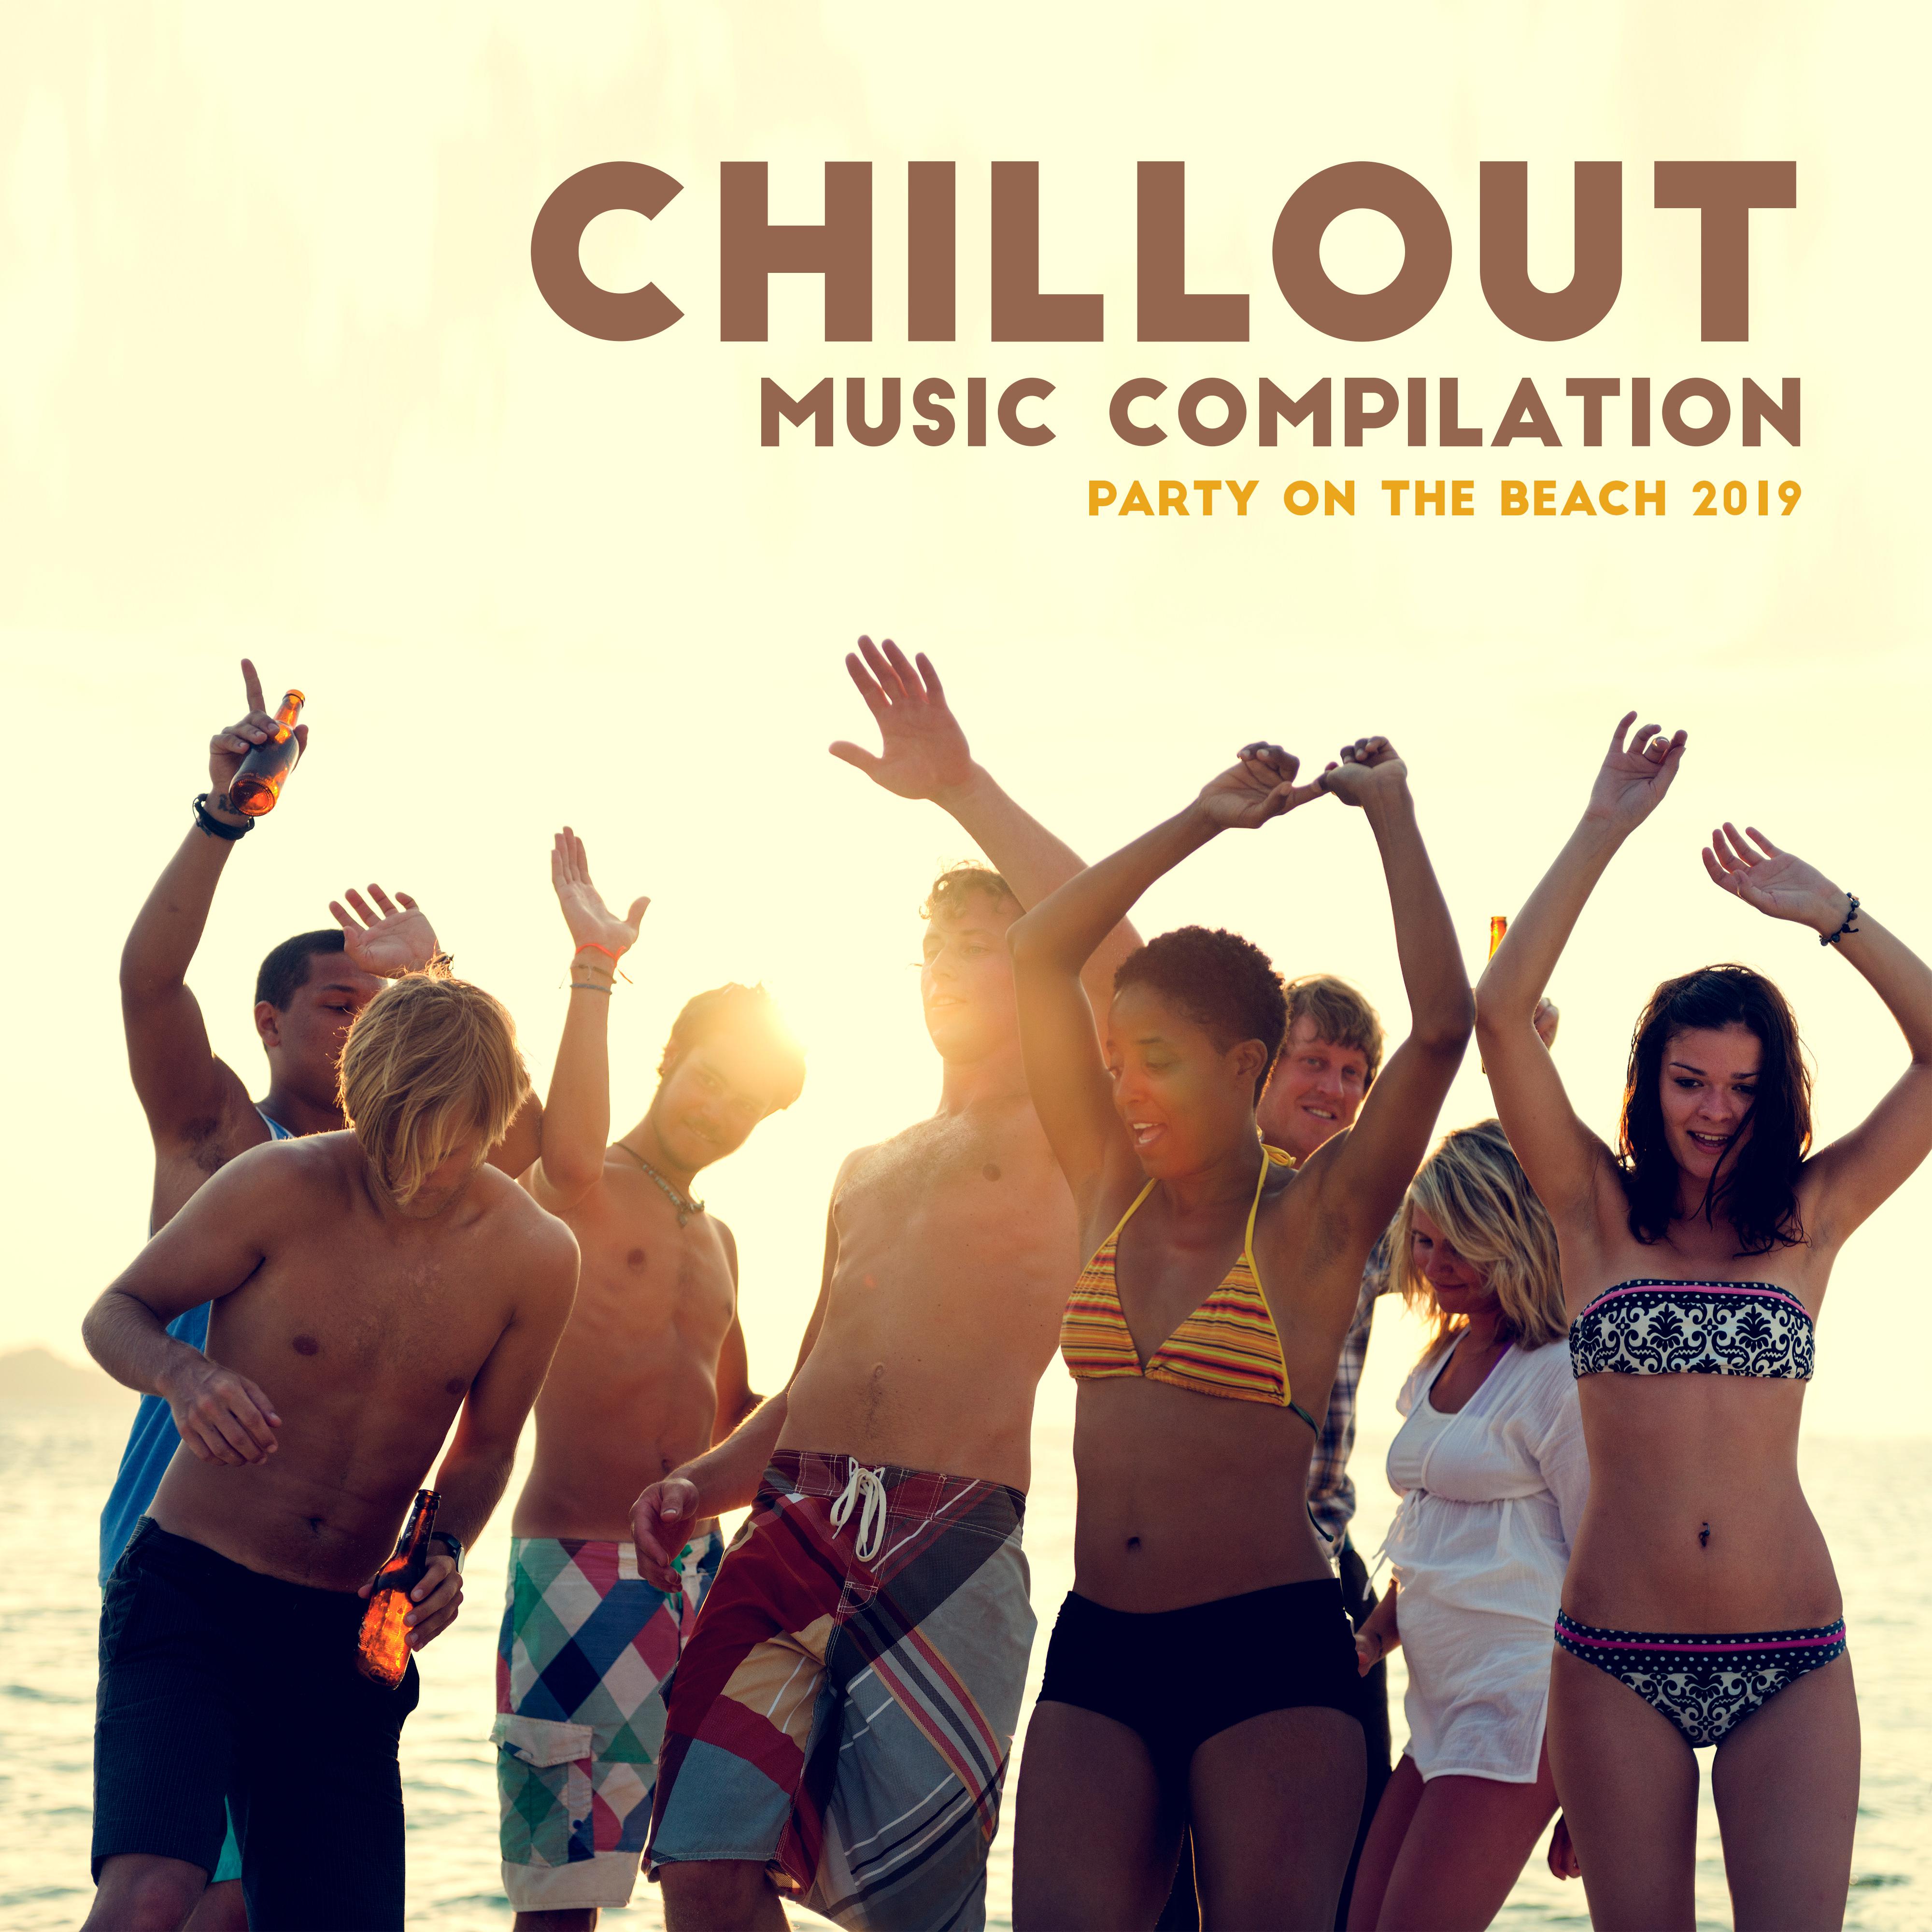 Chillout Music Compilation – Party on the Beach 2019